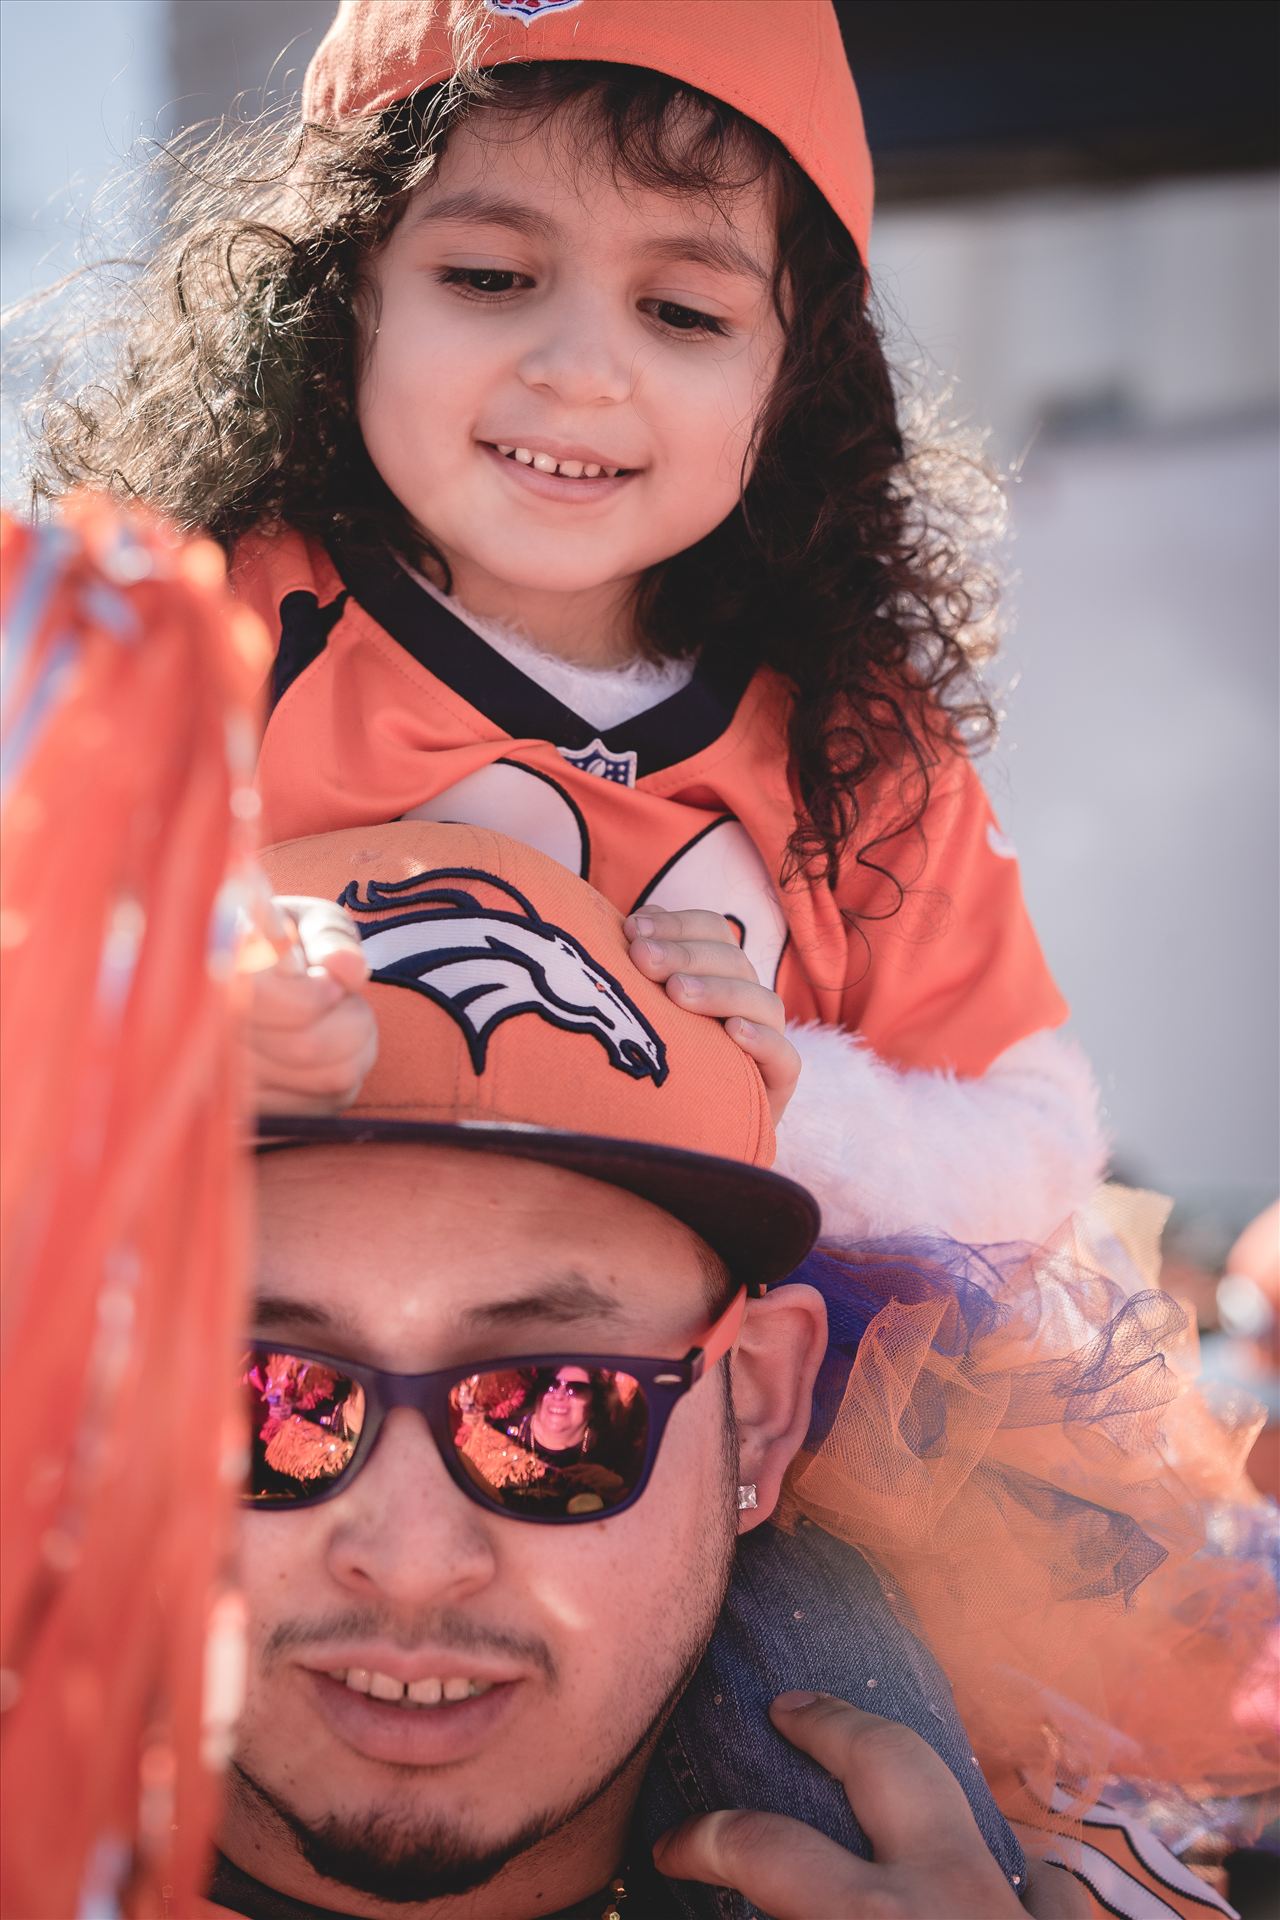 Father Daughter Broncos Fans If you know who these two are... please contact me! I'd love to pass their photo long to them. by Scott Smith Photos